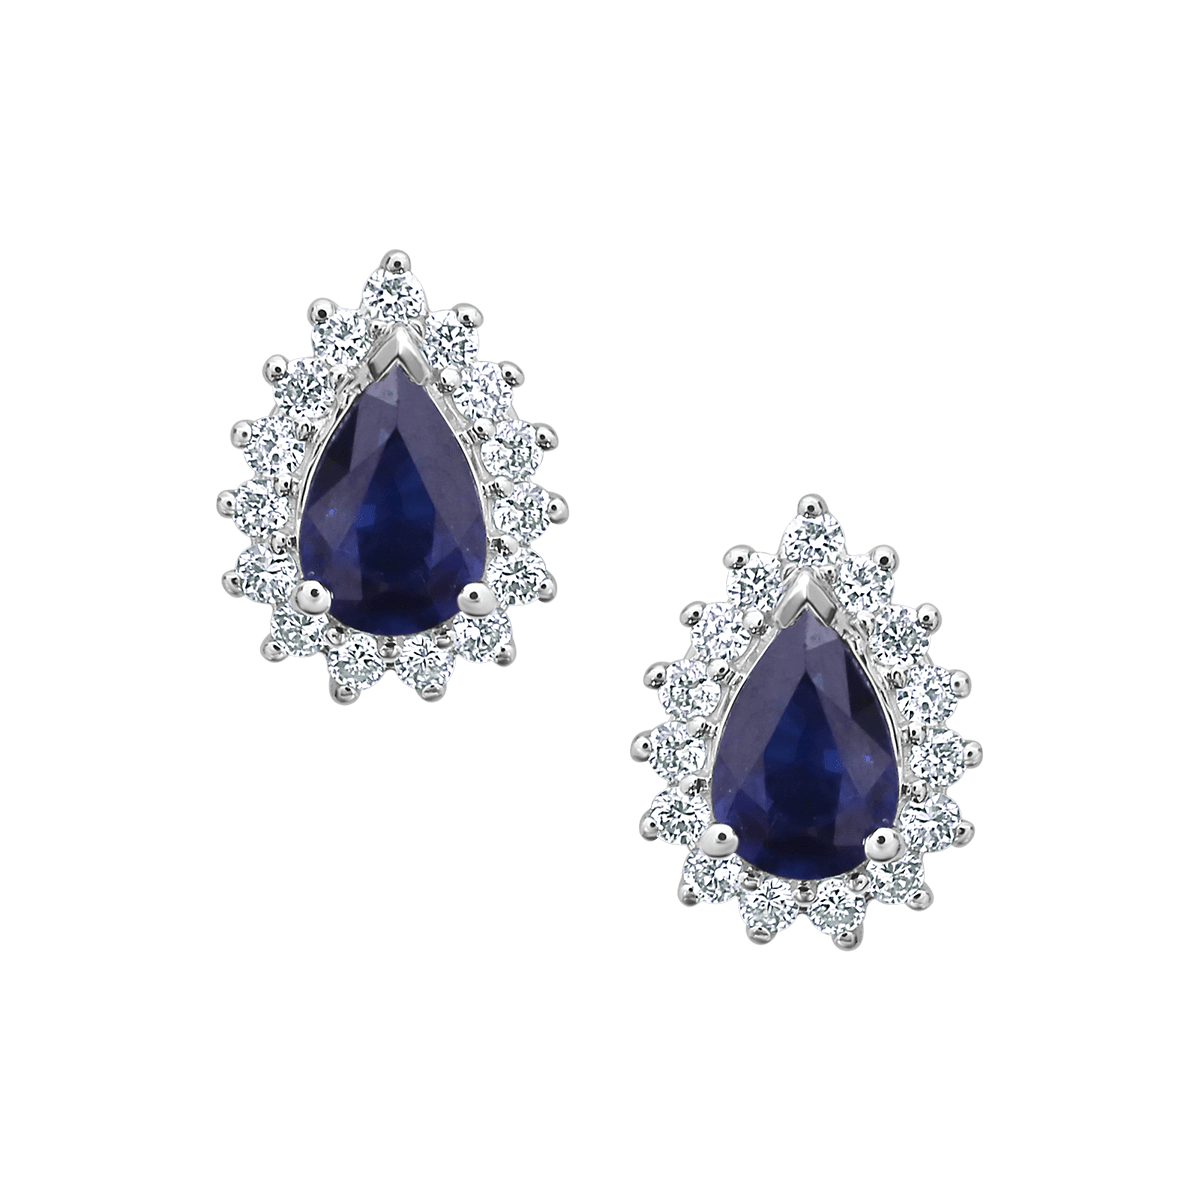 Pear Gemstone Diana Earring From Precious Collection